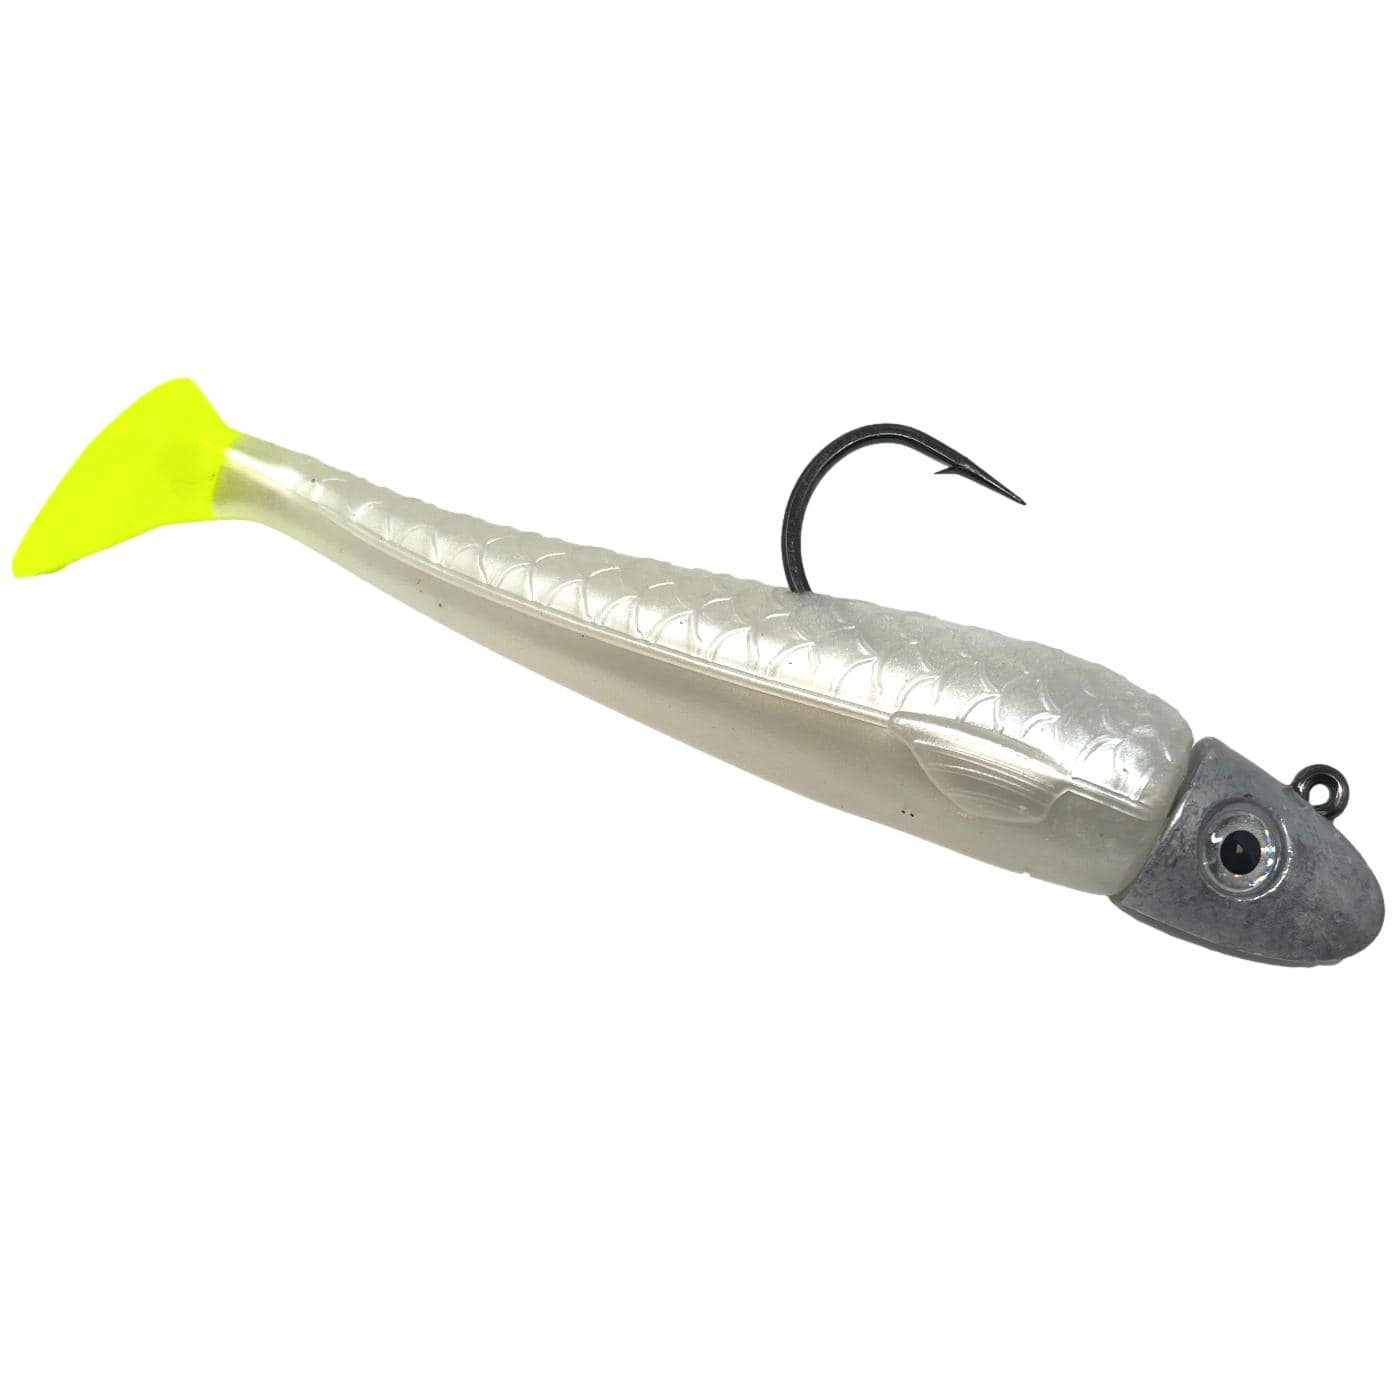 RonZ Z-Fin Original Series Rigged Sand Eel (5 and 6) - The Saltwater Edge